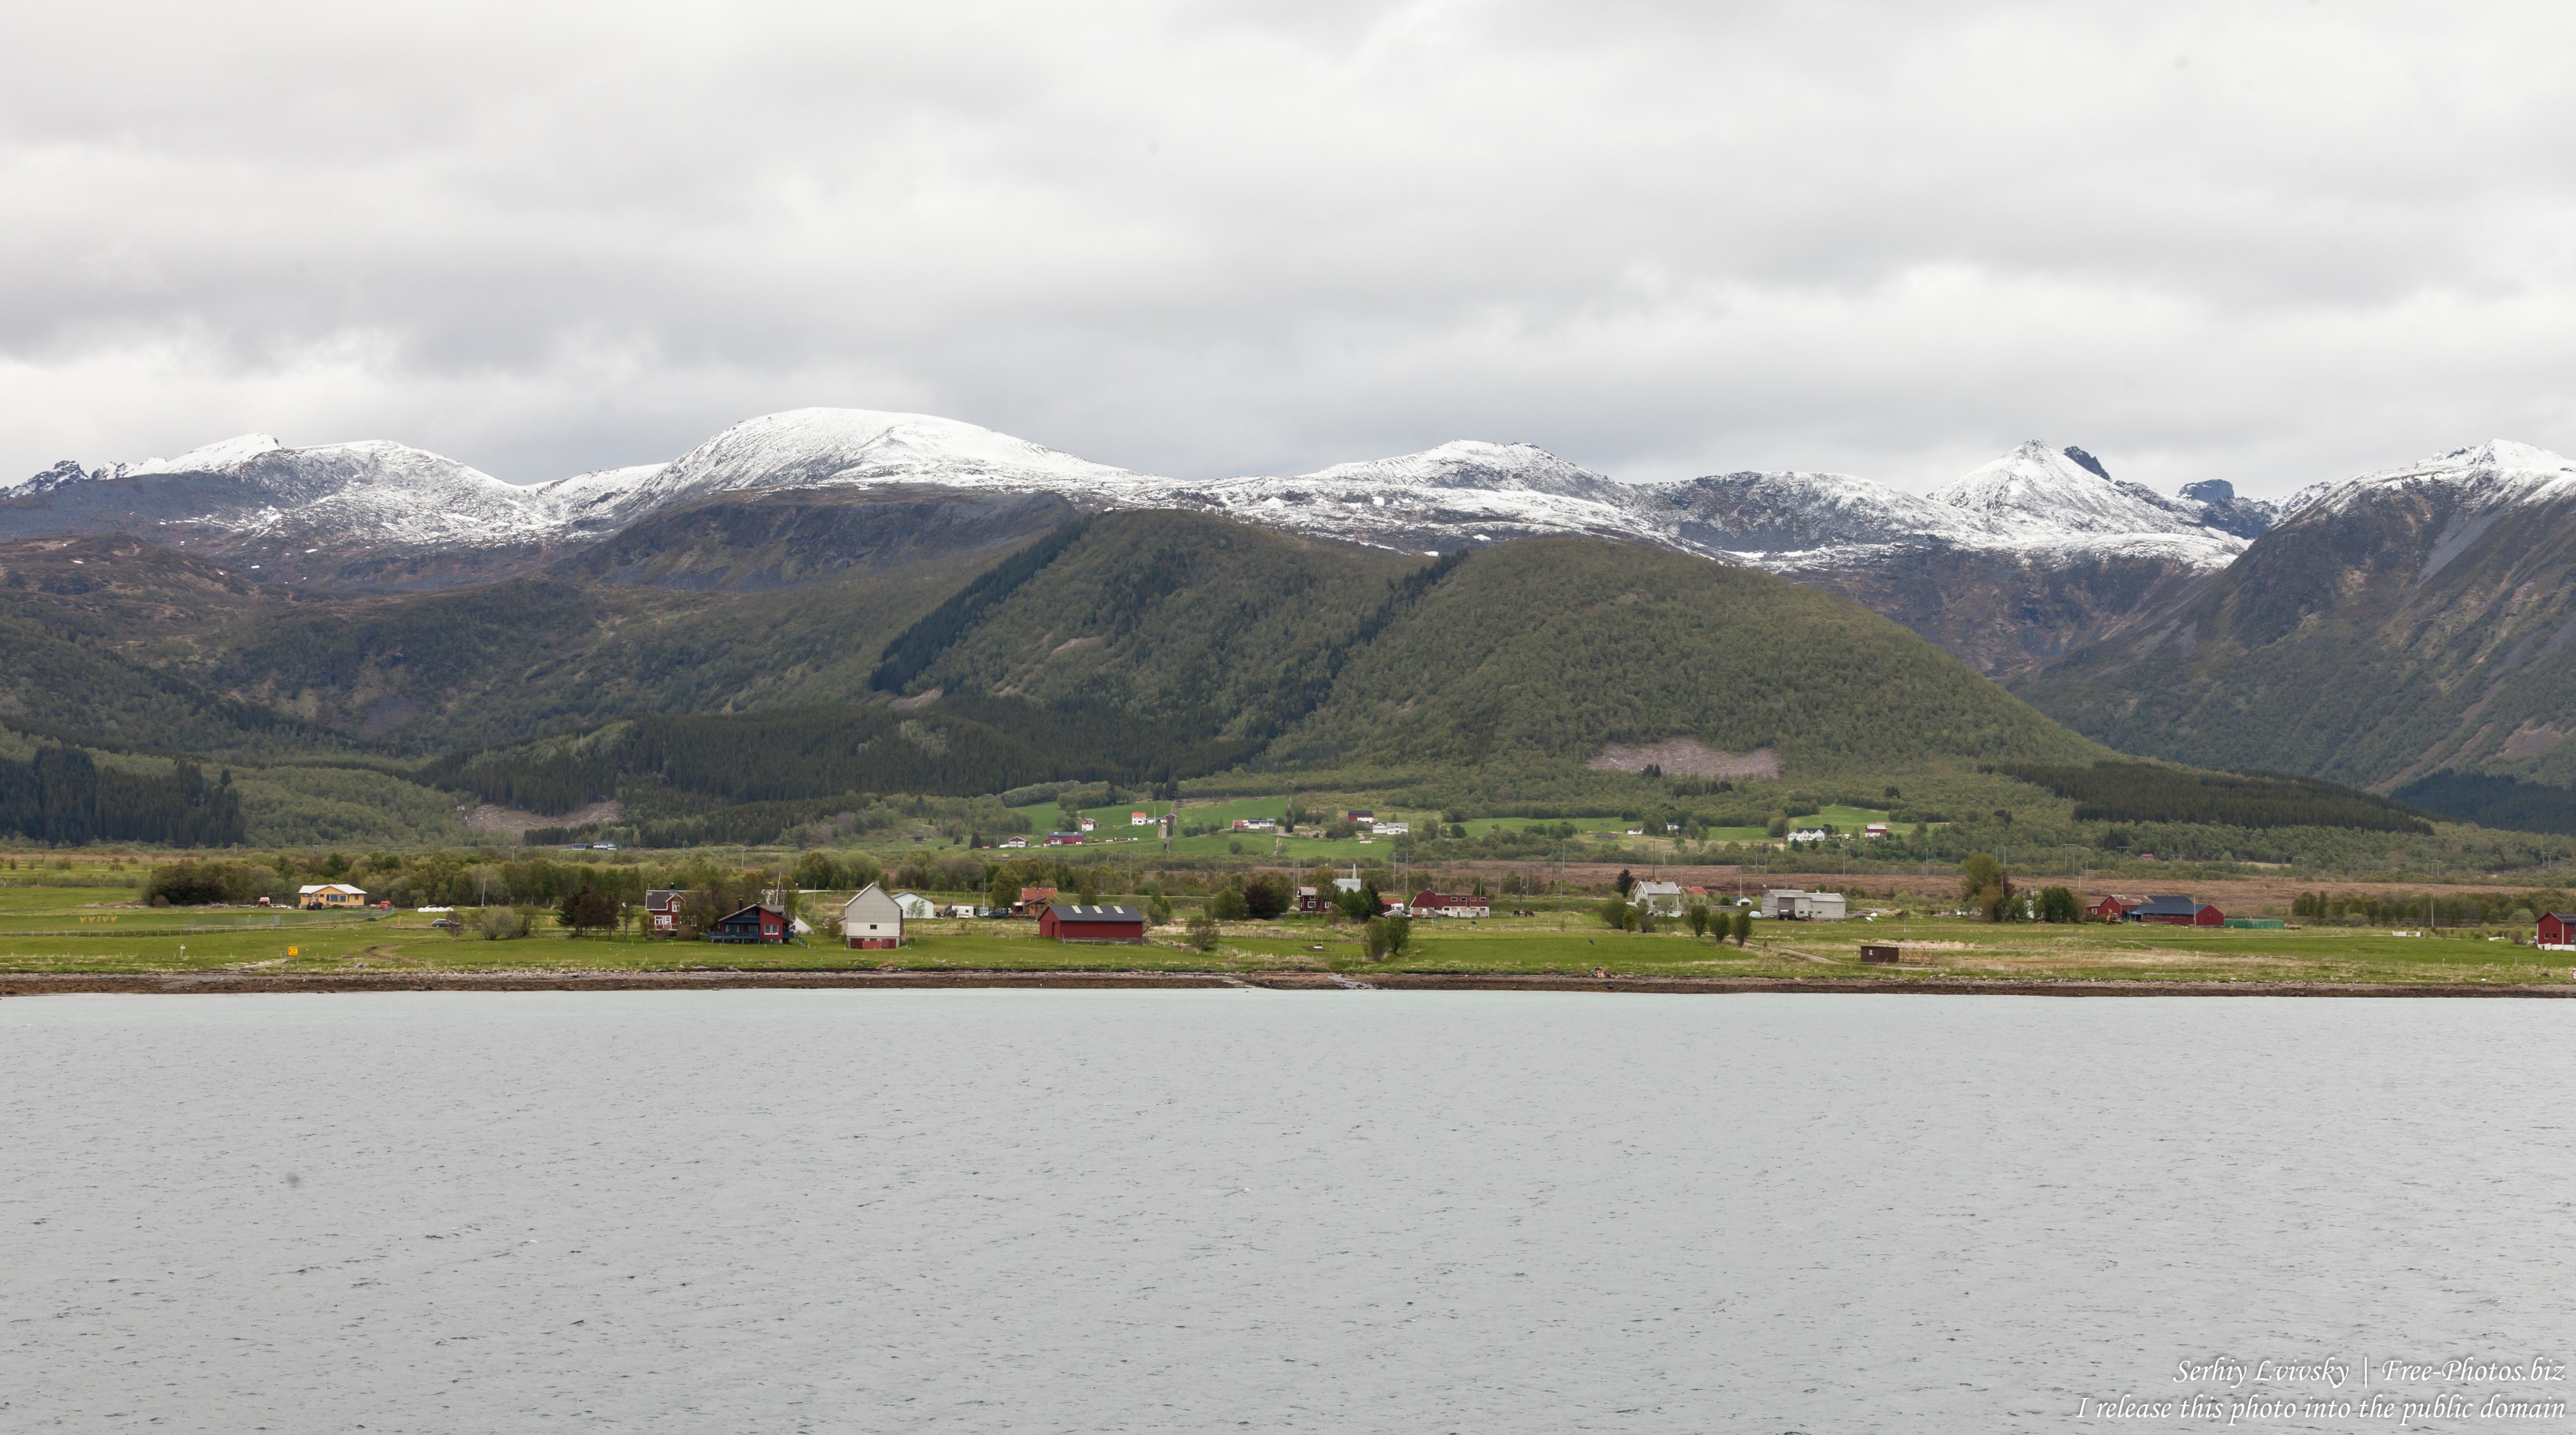 way from Sortland to Stokmarknes, Norway, photographed in June 2018 by Serhiy Lvivsky, picture 9